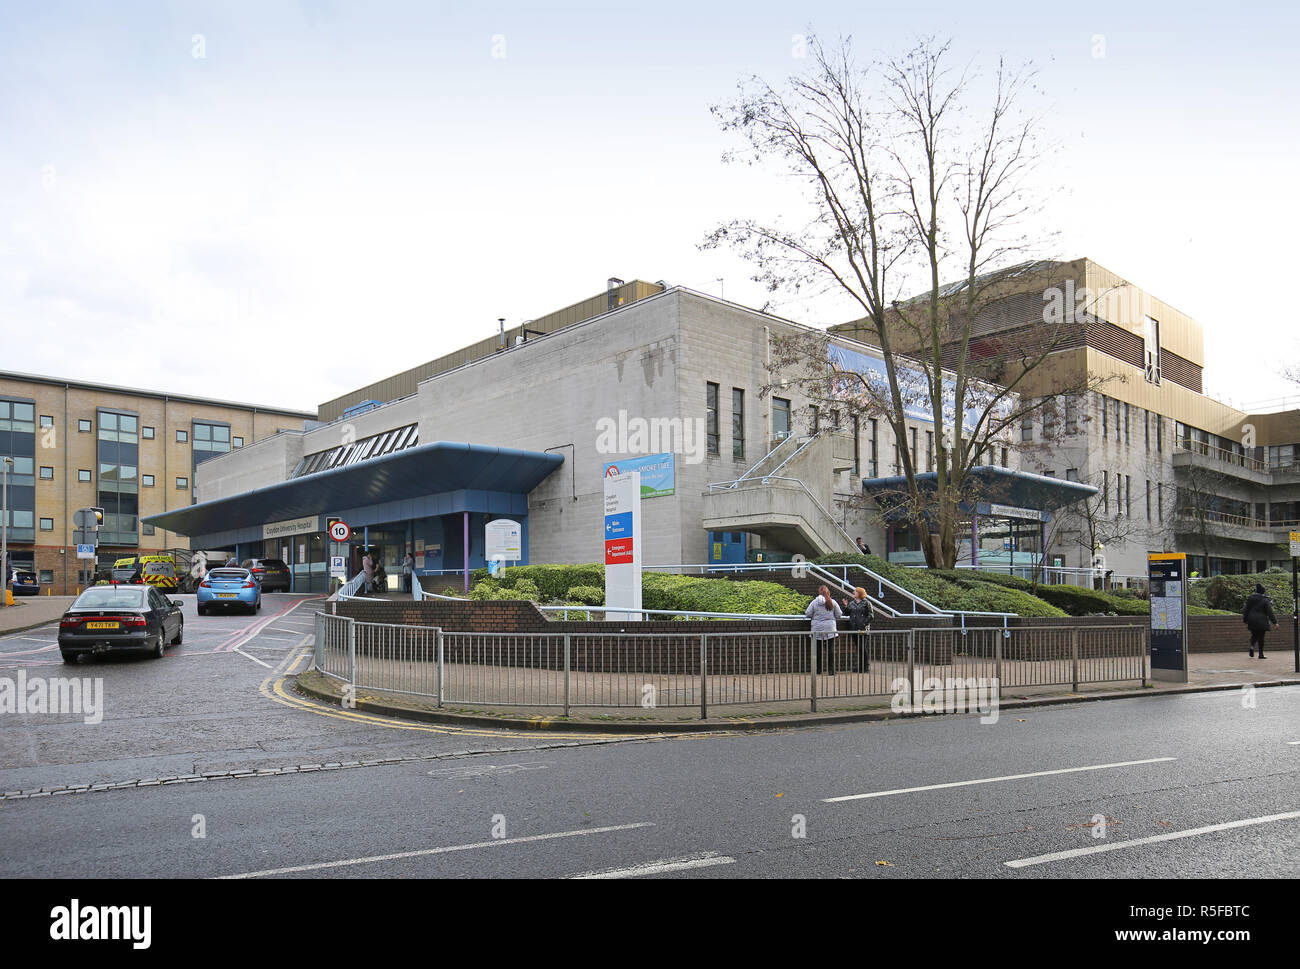 The Main Entrance To Croydon University Hospital In South London Uk A Typical Regional Hospital Comprising Victorian Buildings And Modern Extensions Stock Photo Alamy